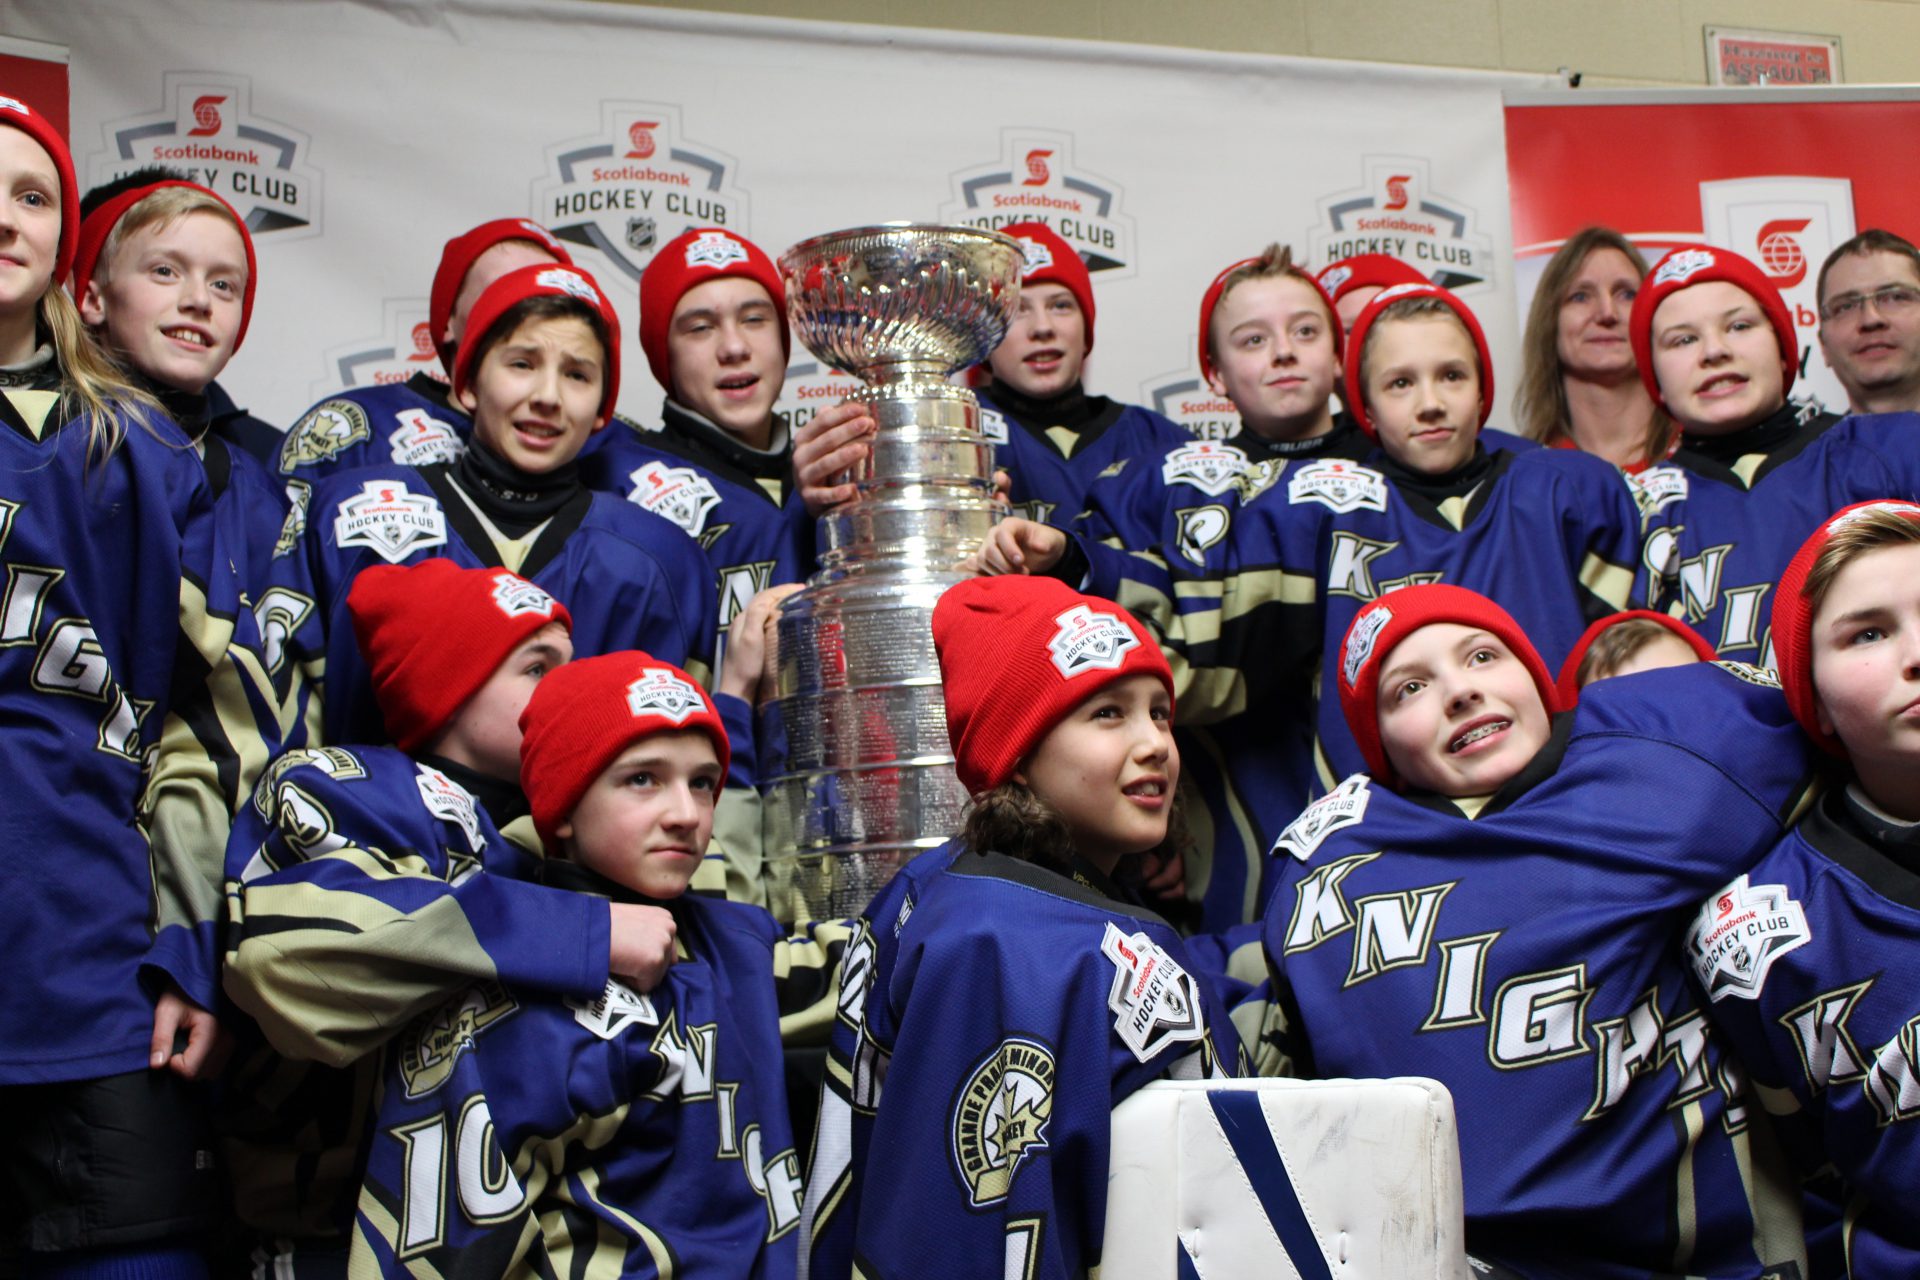 Stanley Cup a surprise for Pee Wee hockey team